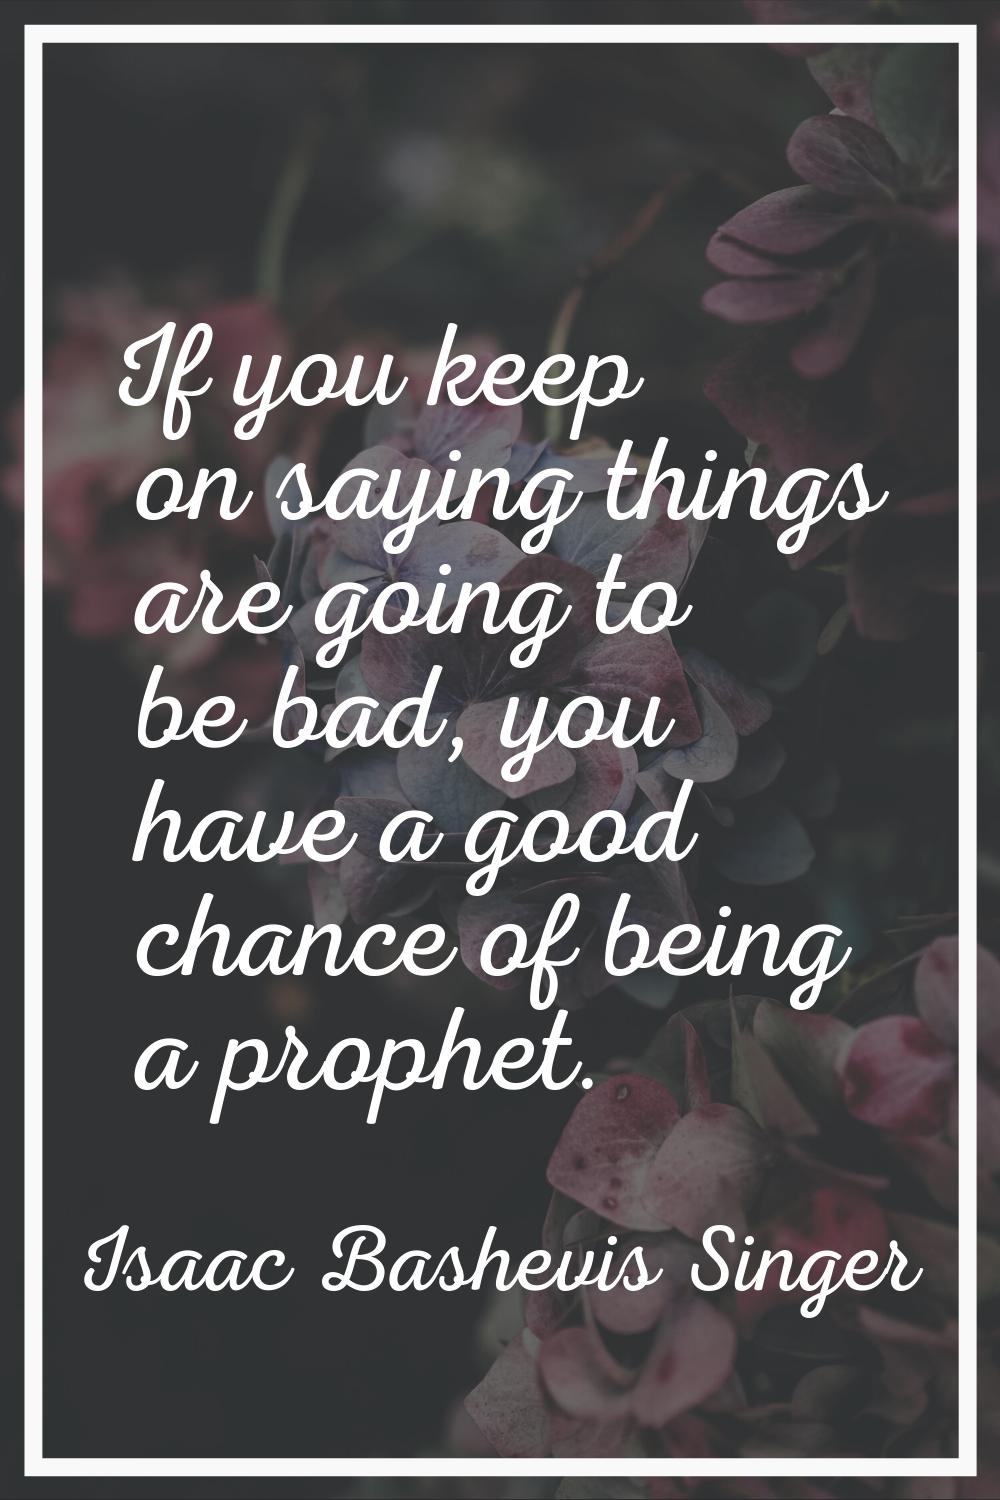 If you keep on saying things are going to be bad, you have a good chance of being a prophet.